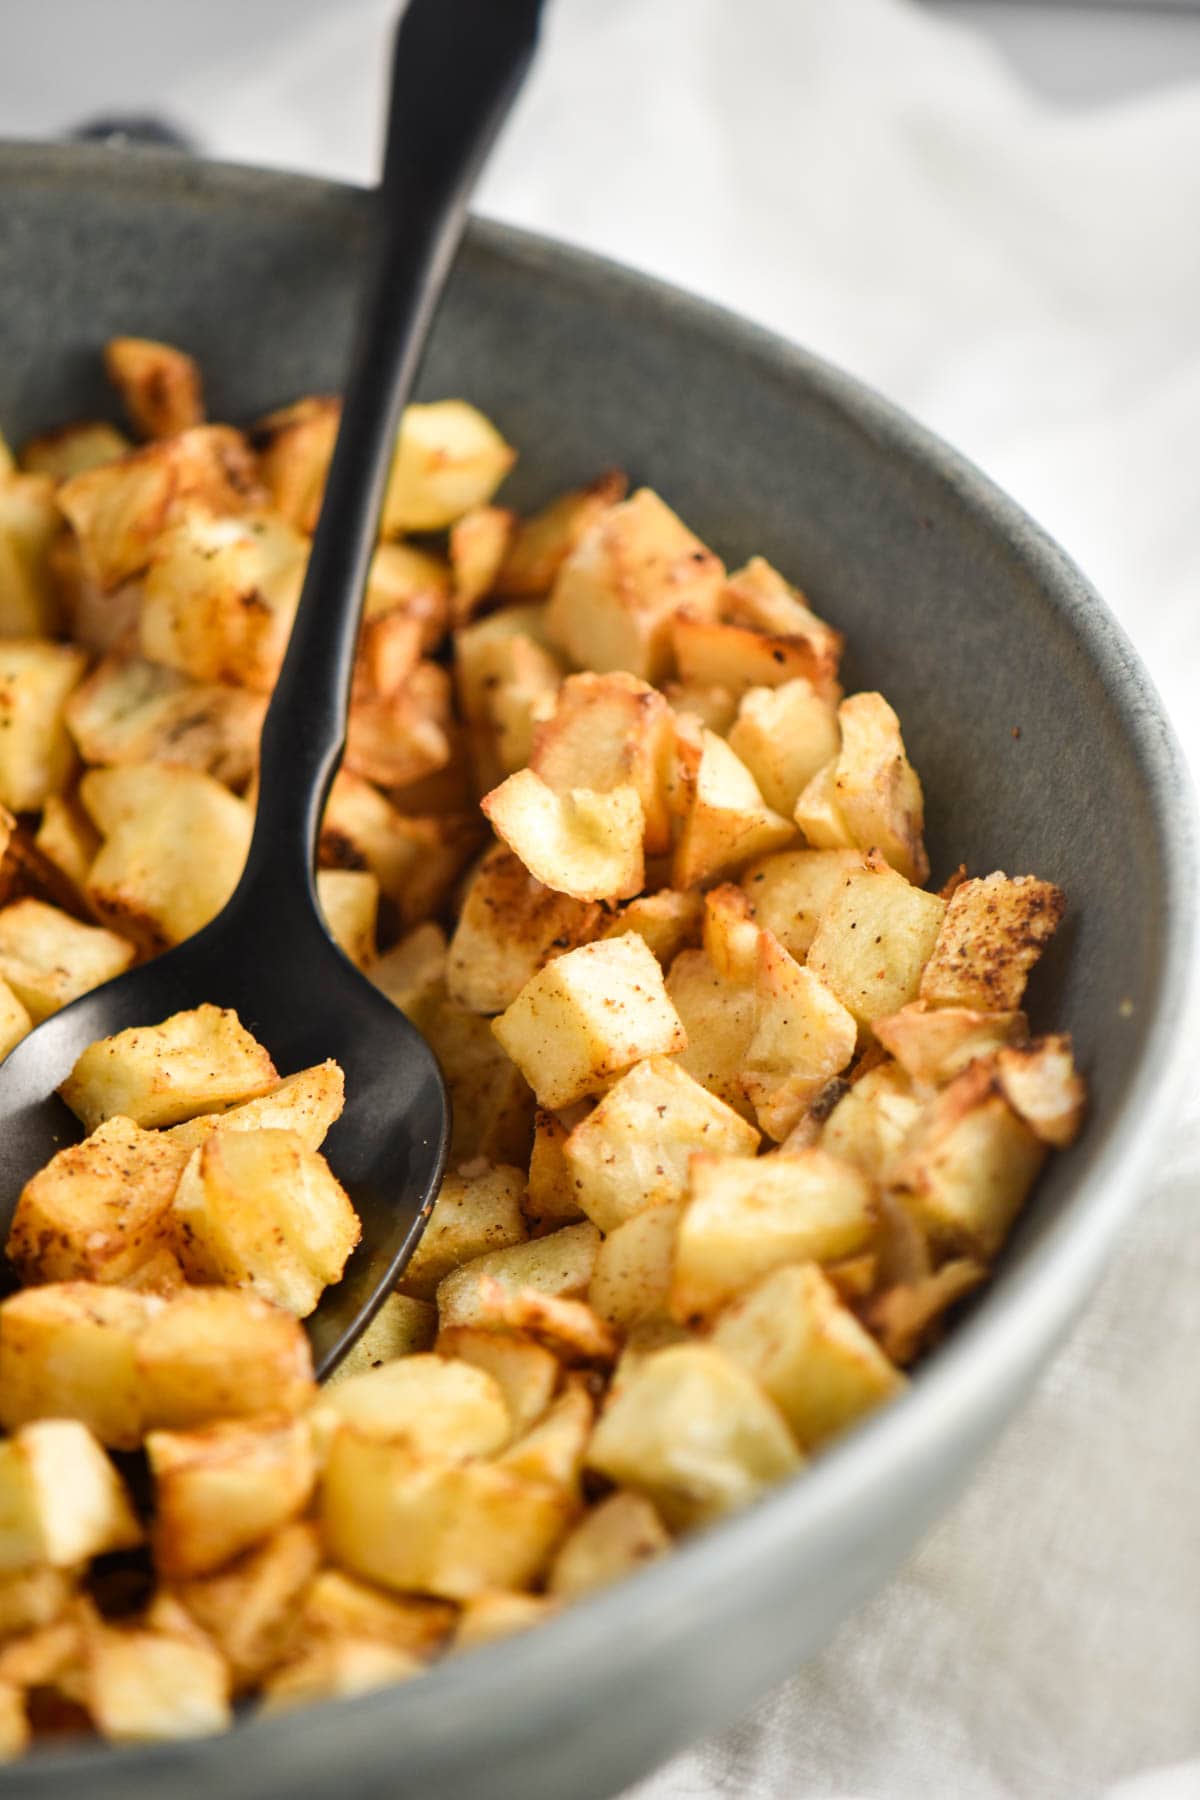 Southern style air fried hash browns in a bowl.